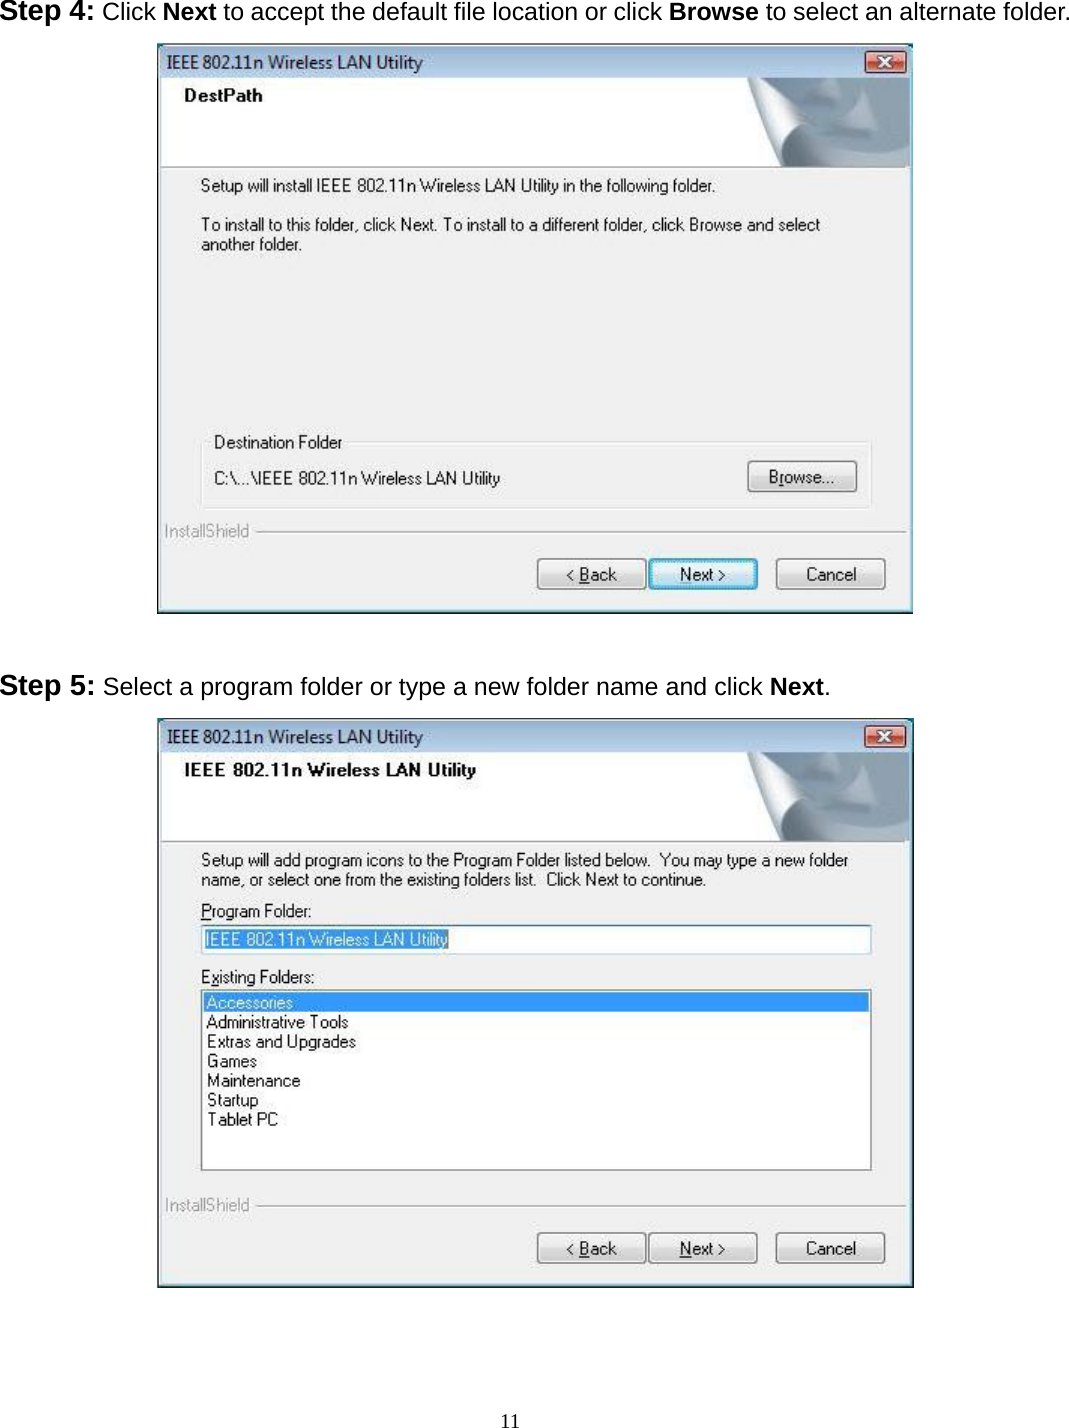  11 Step 4: Click Next to accept the default file location or click Browse to select an alternate folder.   Step 5: Select a program folder or type a new folder name and click Next.  